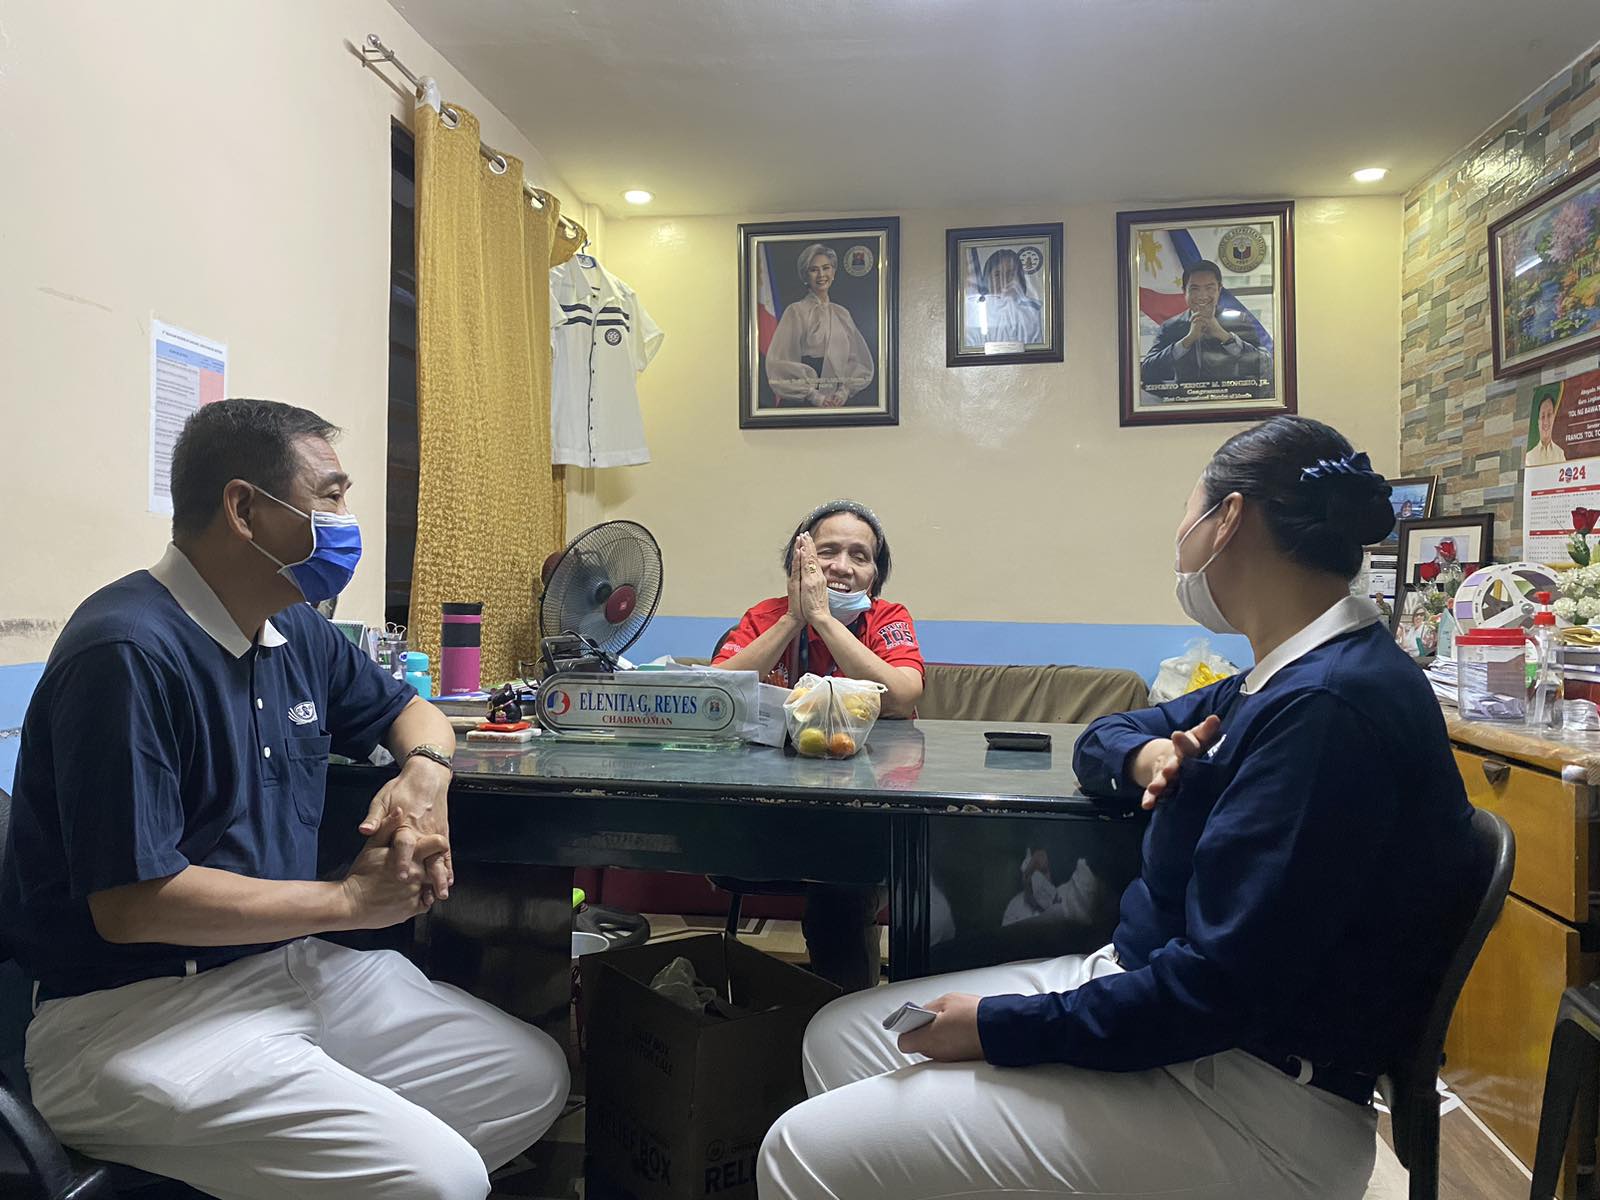 Tzu Chi volunteers Kevin King (left) and Sharon Sy (right) pay a courtesy call to Barangay 105 Chairwoman Elenita “Leny” Reyes during the distribution of GI sheets to the community’s fire victims.